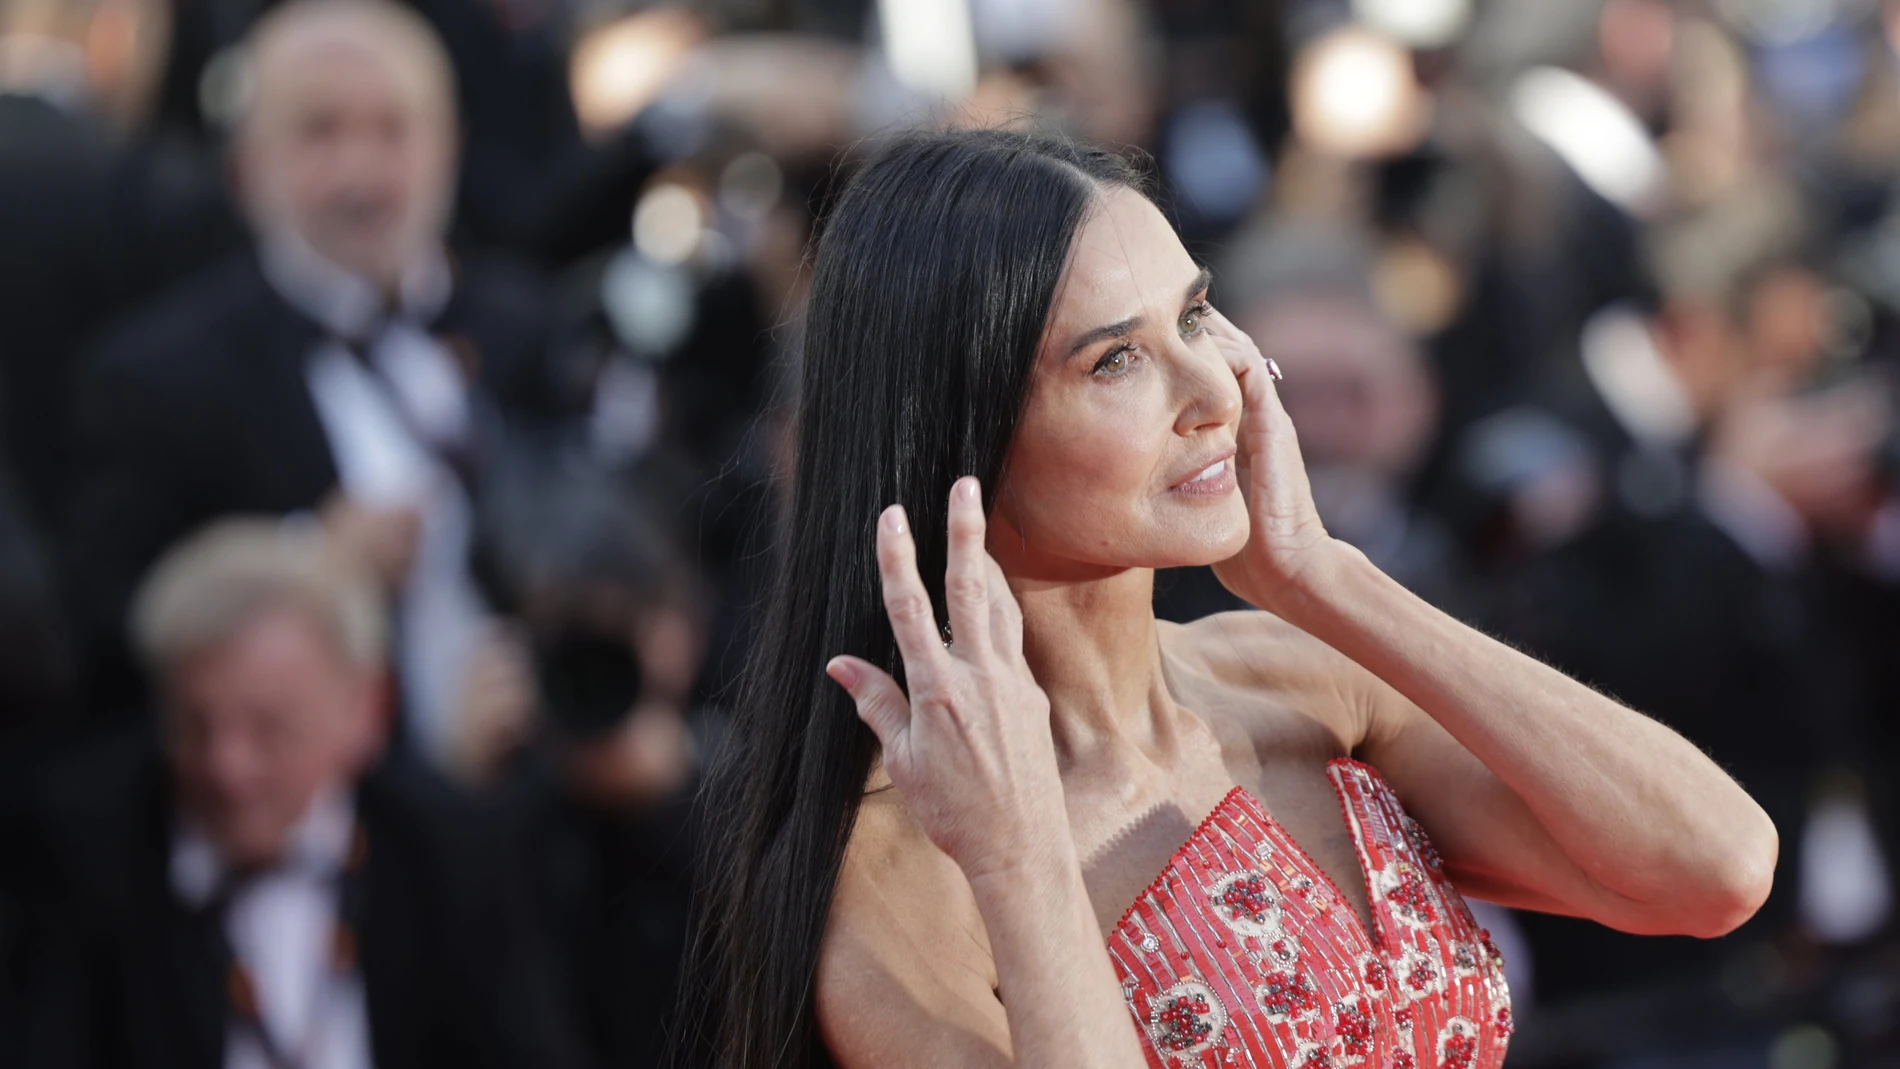 Demi Moore attends the premiere of 'Kinds of Kindness' during the 77th annual Cannes Film Festival, in Cannes, France.